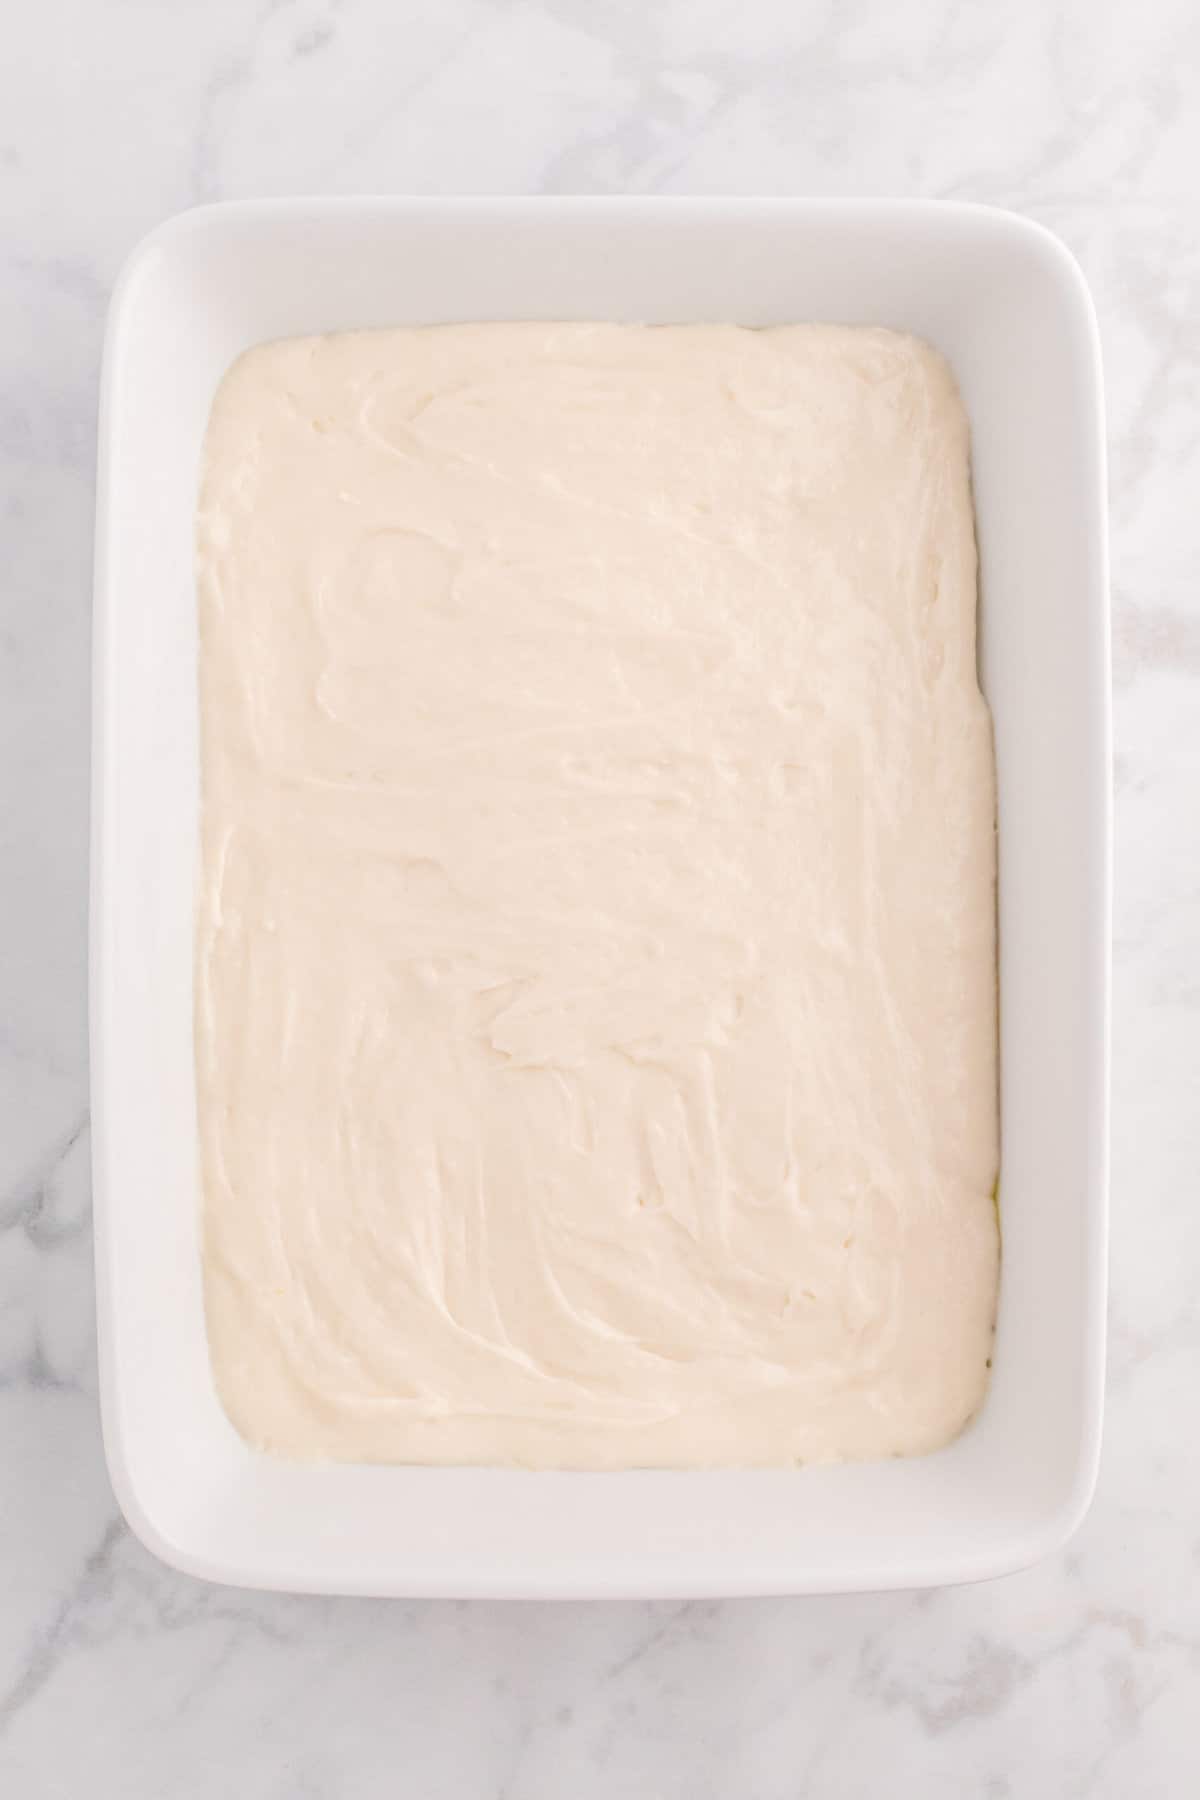 Pour two cups of batter into prepped cake pan.